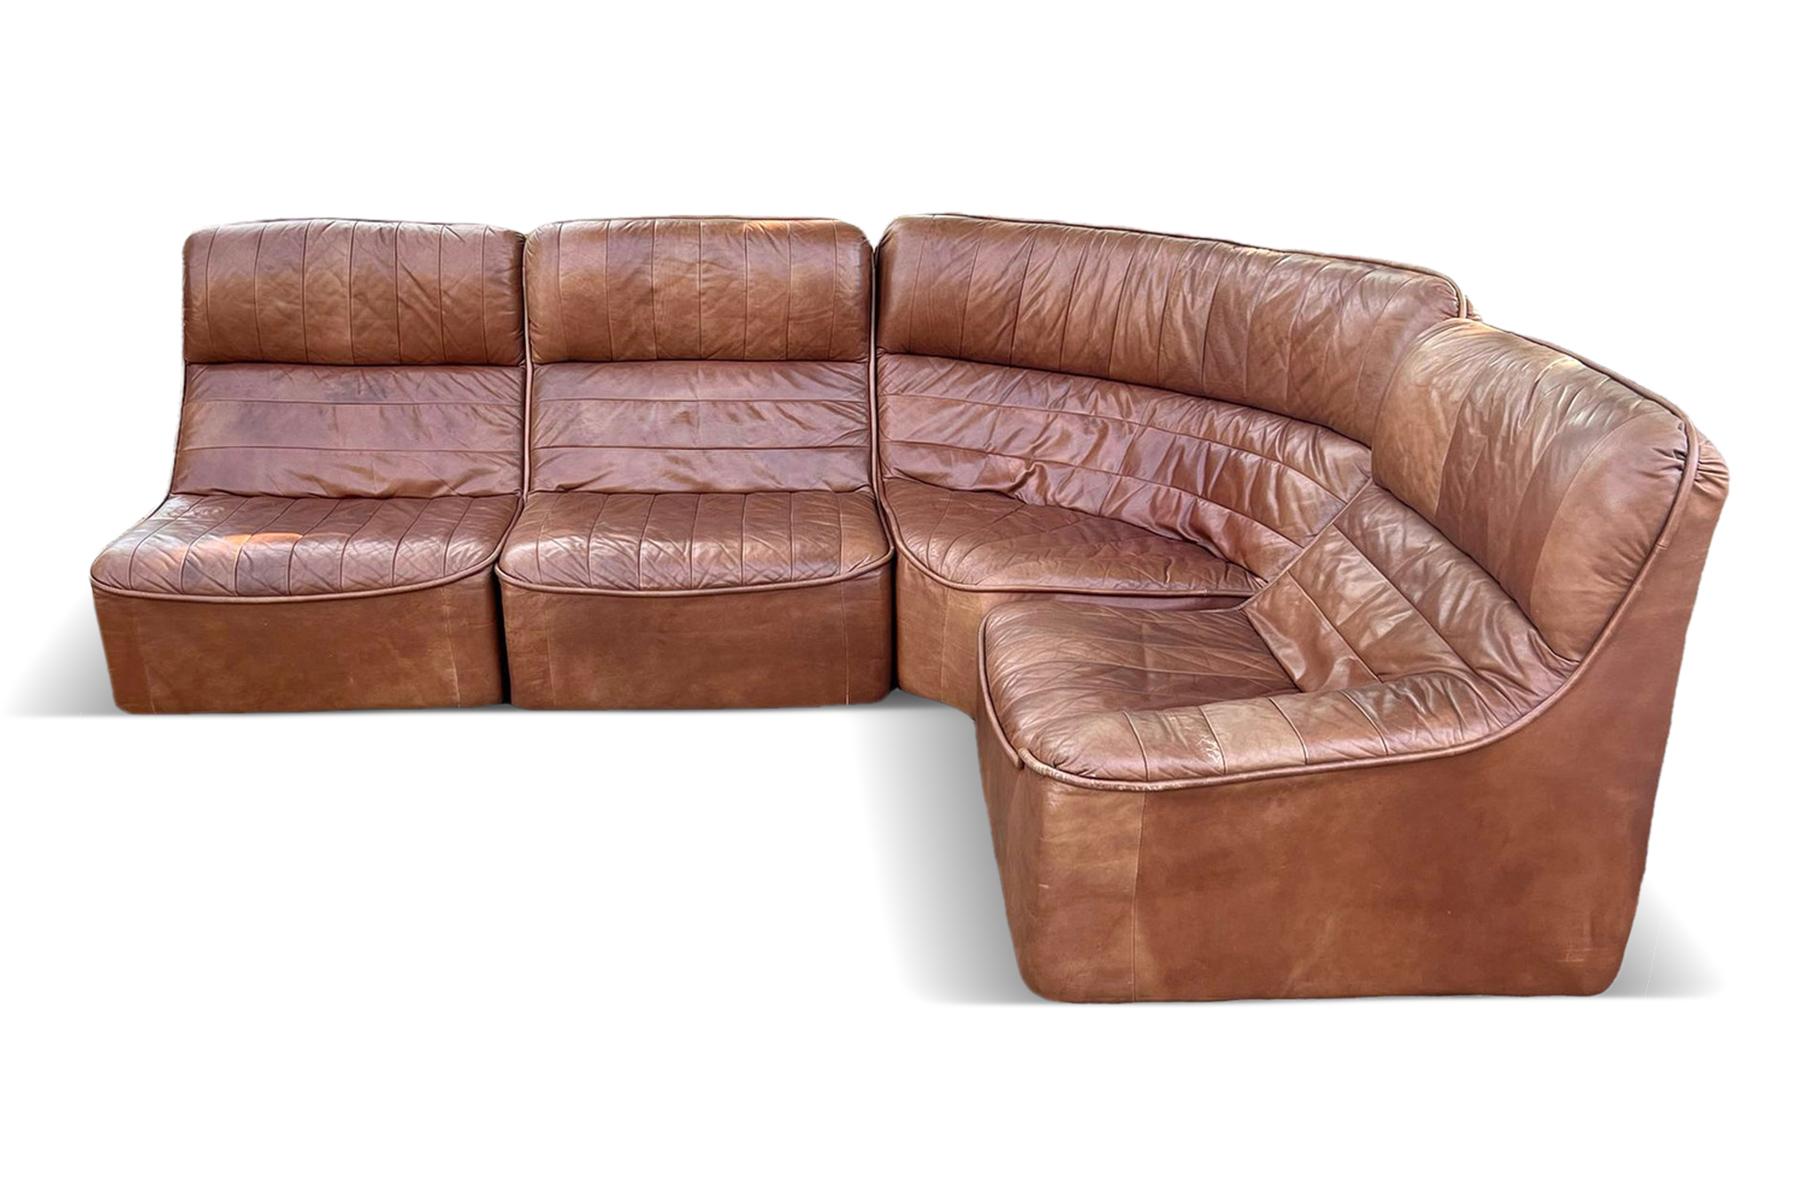 1970s Modular Leather Sofa in Cognac Leather For Sale 3